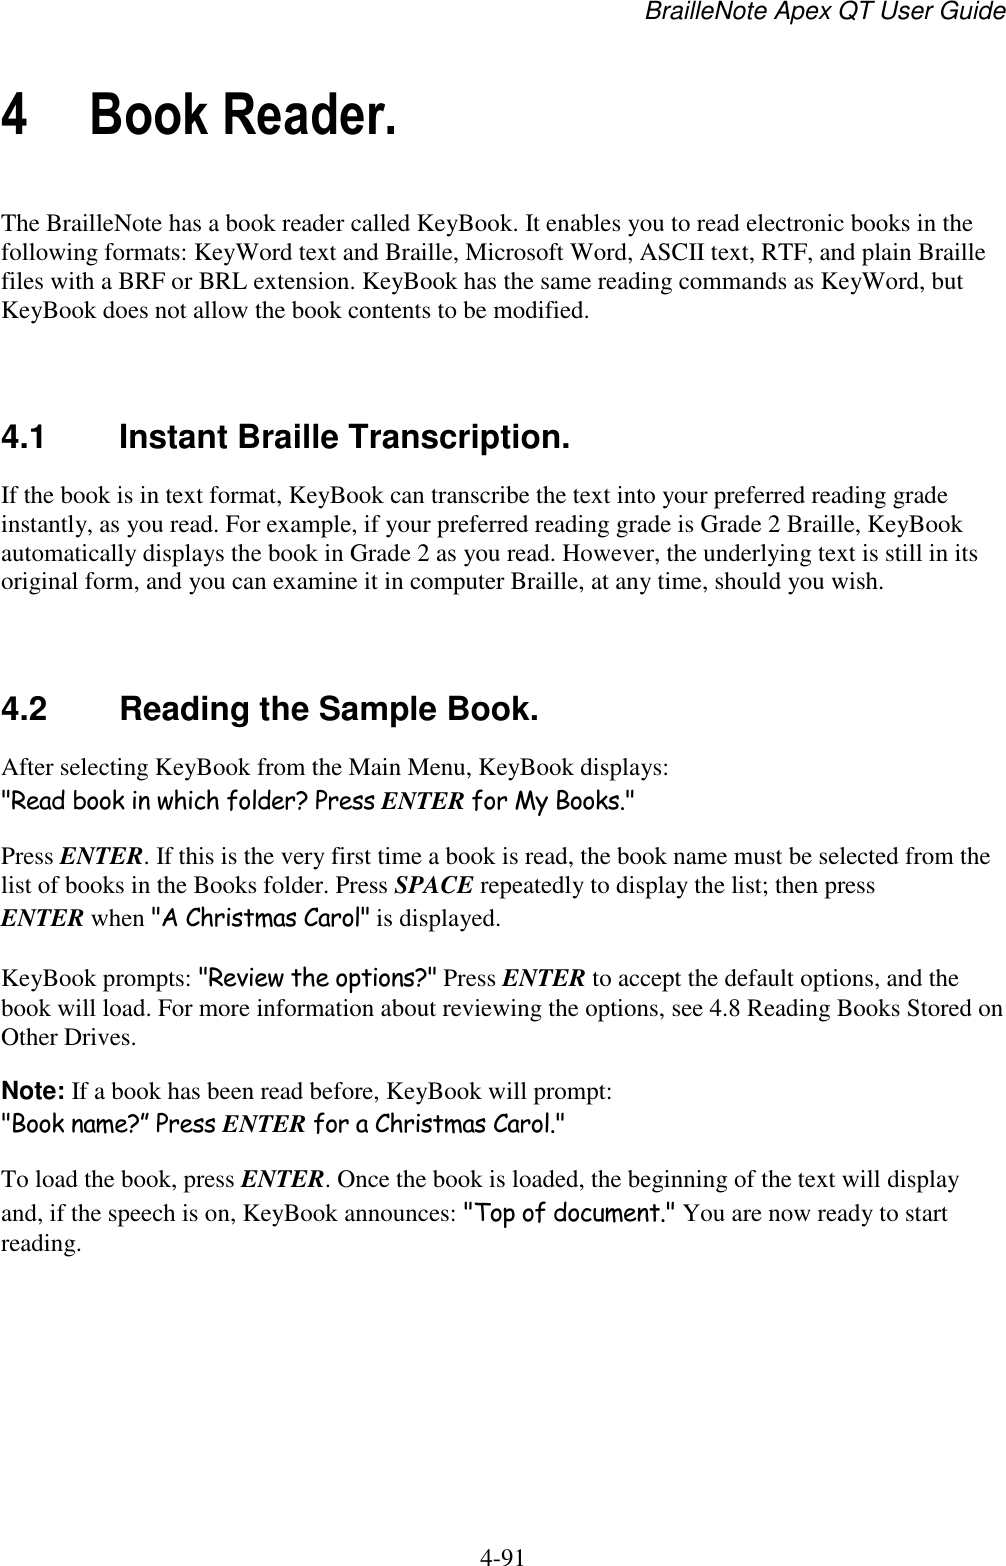 BrailleNote Apex QT User Guide  4-91   4 Book Reader. The BrailleNote has a book reader called KeyBook. It enables you to read electronic books in the following formats: KeyWord text and Braille, Microsoft Word, ASCII text, RTF, and plain Braille files with a BRF or BRL extension. KeyBook has the same reading commands as KeyWord, but KeyBook does not allow the book contents to be modified.   4.1  Instant Braille Transcription. If the book is in text format, KeyBook can transcribe the text into your preferred reading grade instantly, as you read. For example, if your preferred reading grade is Grade 2 Braille, KeyBook automatically displays the book in Grade 2 as you read. However, the underlying text is still in its original form, and you can examine it in computer Braille, at any time, should you wish.   4.2  Reading the Sample Book. After selecting KeyBook from the Main Menu, KeyBook displays: &quot;Read book in which folder? Press ENTER for My Books.&quot; Press ENTER. If this is the very first time a book is read, the book name must be selected from the list of books in the Books folder. Press SPACE repeatedly to display the list; then press ENTER when &quot;A Christmas Carol&quot; is displayed. KeyBook prompts: &quot;Review the options?&quot; Press ENTER to accept the default options, and the book will load. For more information about reviewing the options, see 4.8 Reading Books Stored on Other Drives. Note: If a book has been read before, KeyBook will prompt: &quot;Book name?” Press ENTER for a Christmas Carol.&quot; To load the book, press ENTER. Once the book is loaded, the beginning of the text will display and, if the speech is on, KeyBook announces: &quot;Top of document.&quot; You are now ready to start reading.   